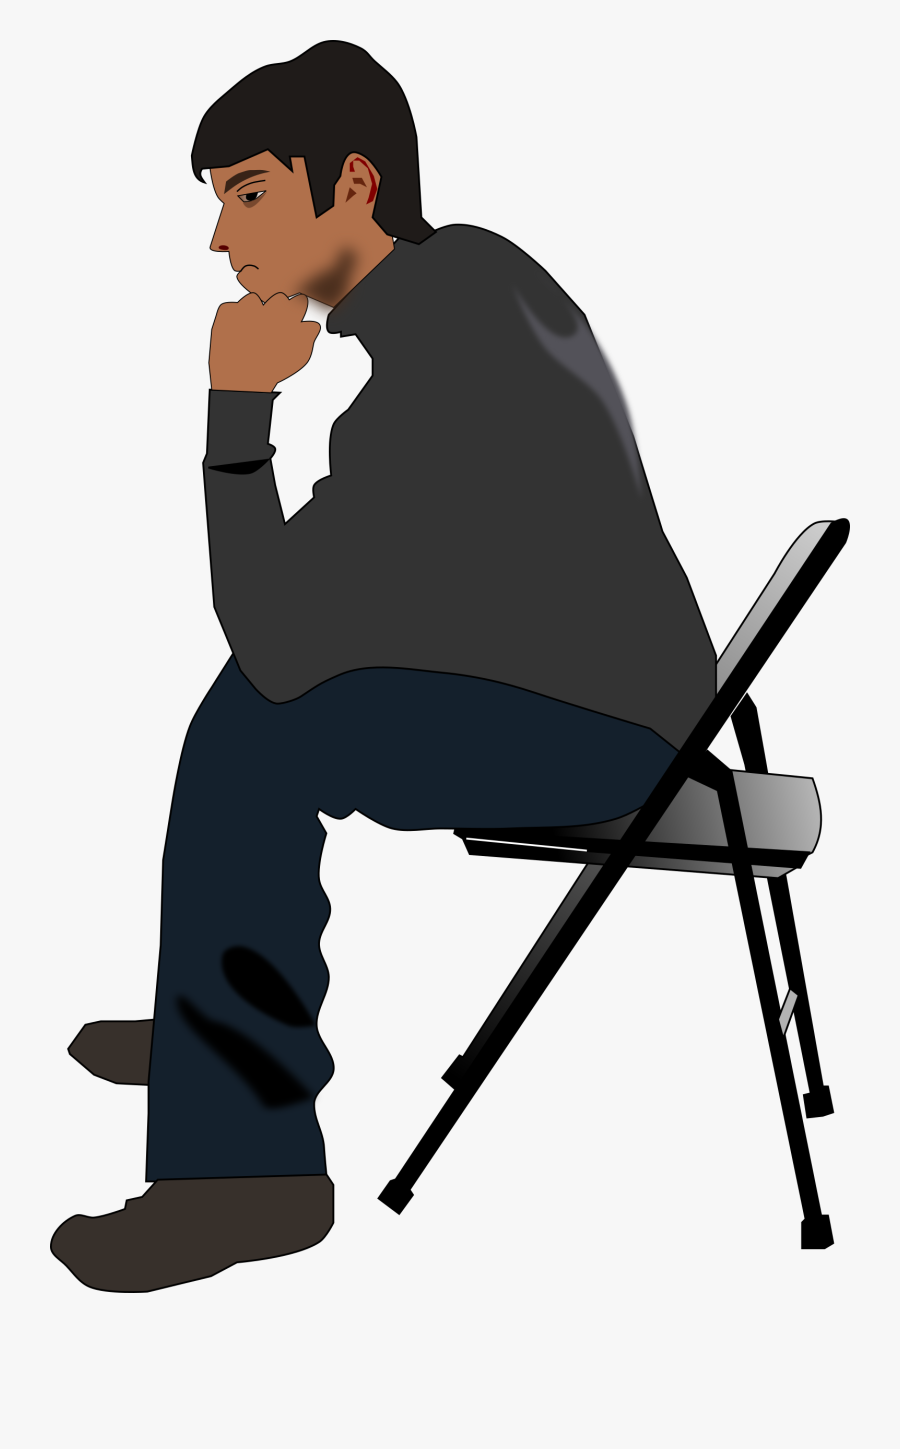 Sitting On A Chair Clipart , Png Download - Sitting On Chair Clipart, Transparent Clipart